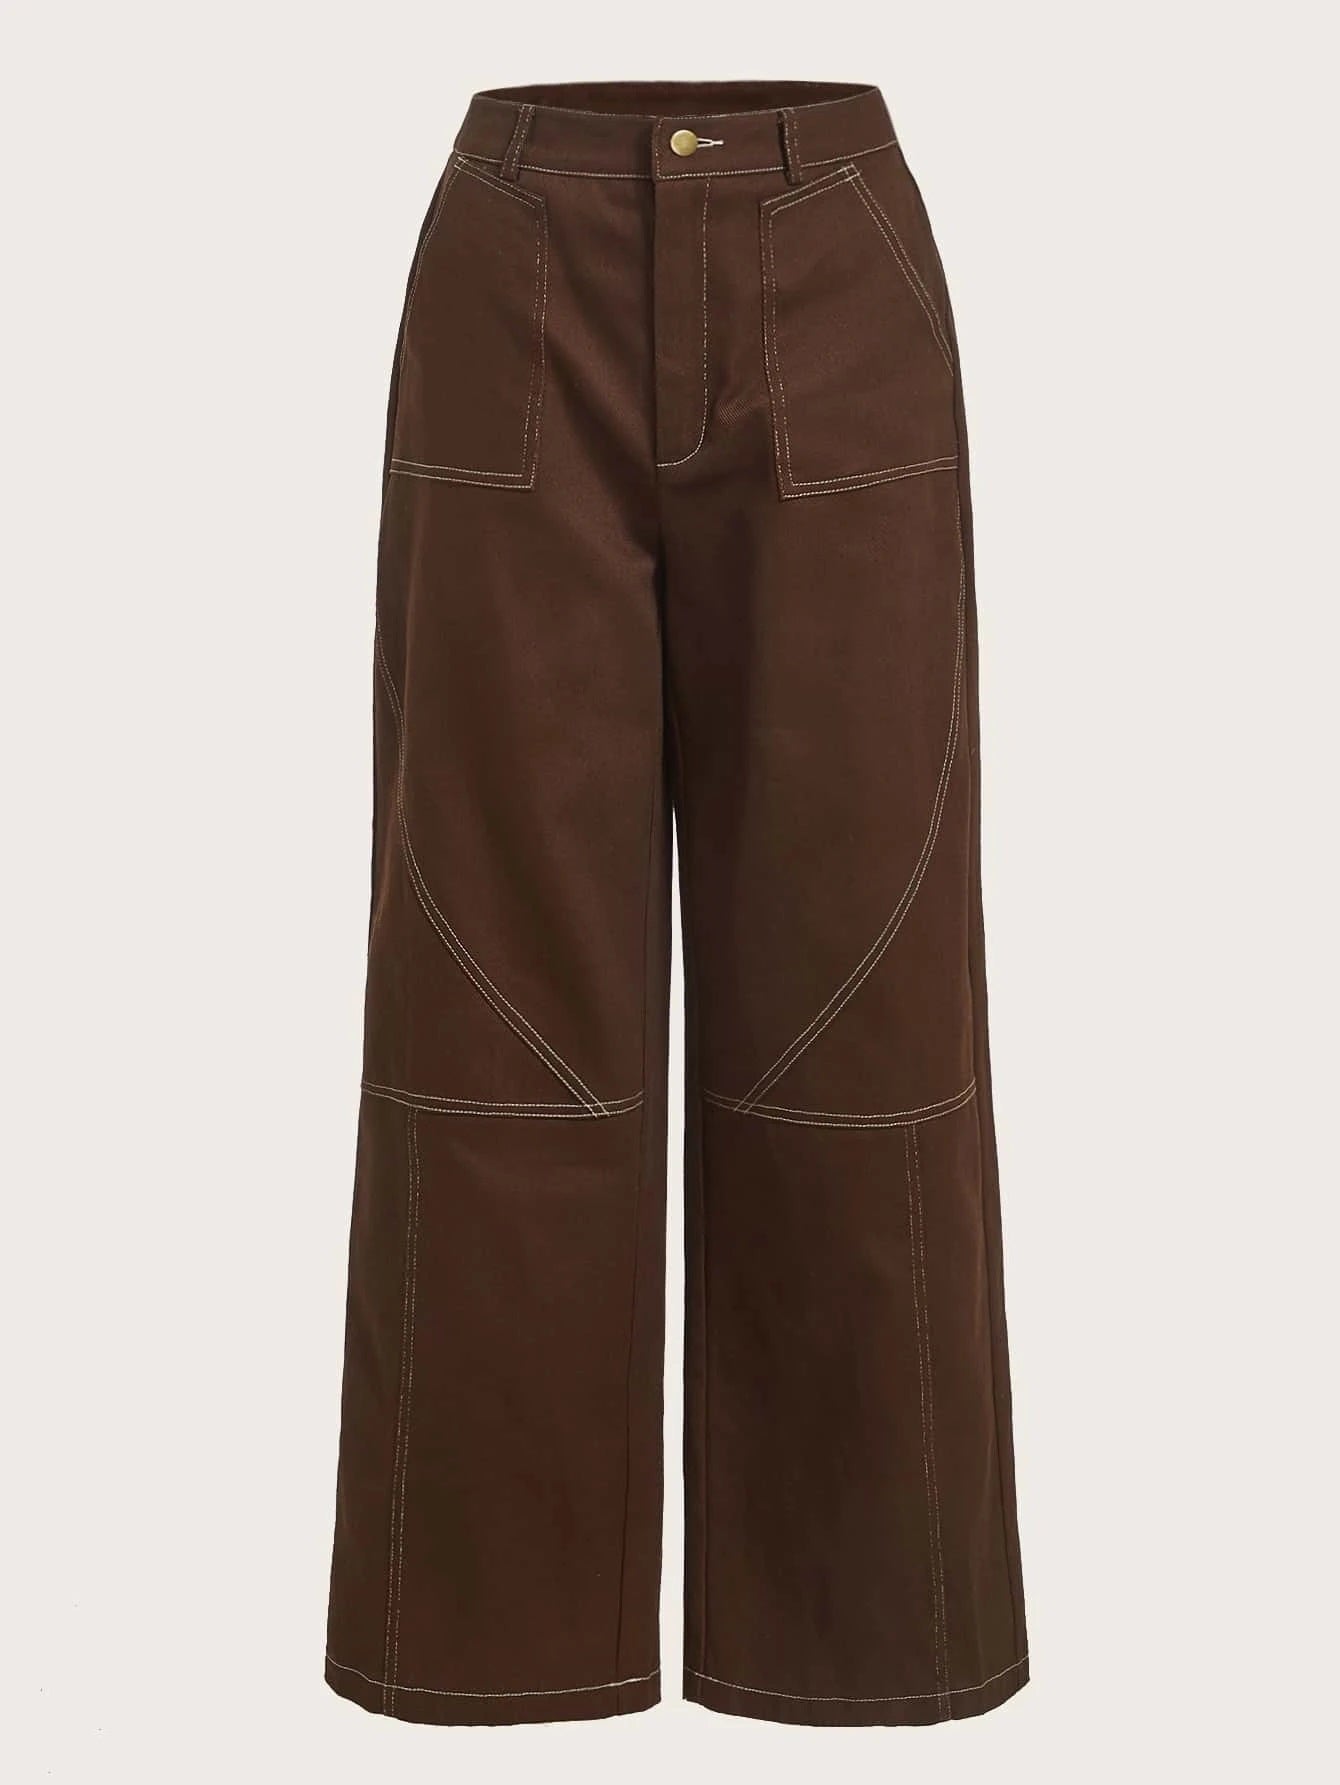 CM-BS217140 Women Casual Seoul Style Top-Stitching Slant Pocket Pants - Coffee Brown